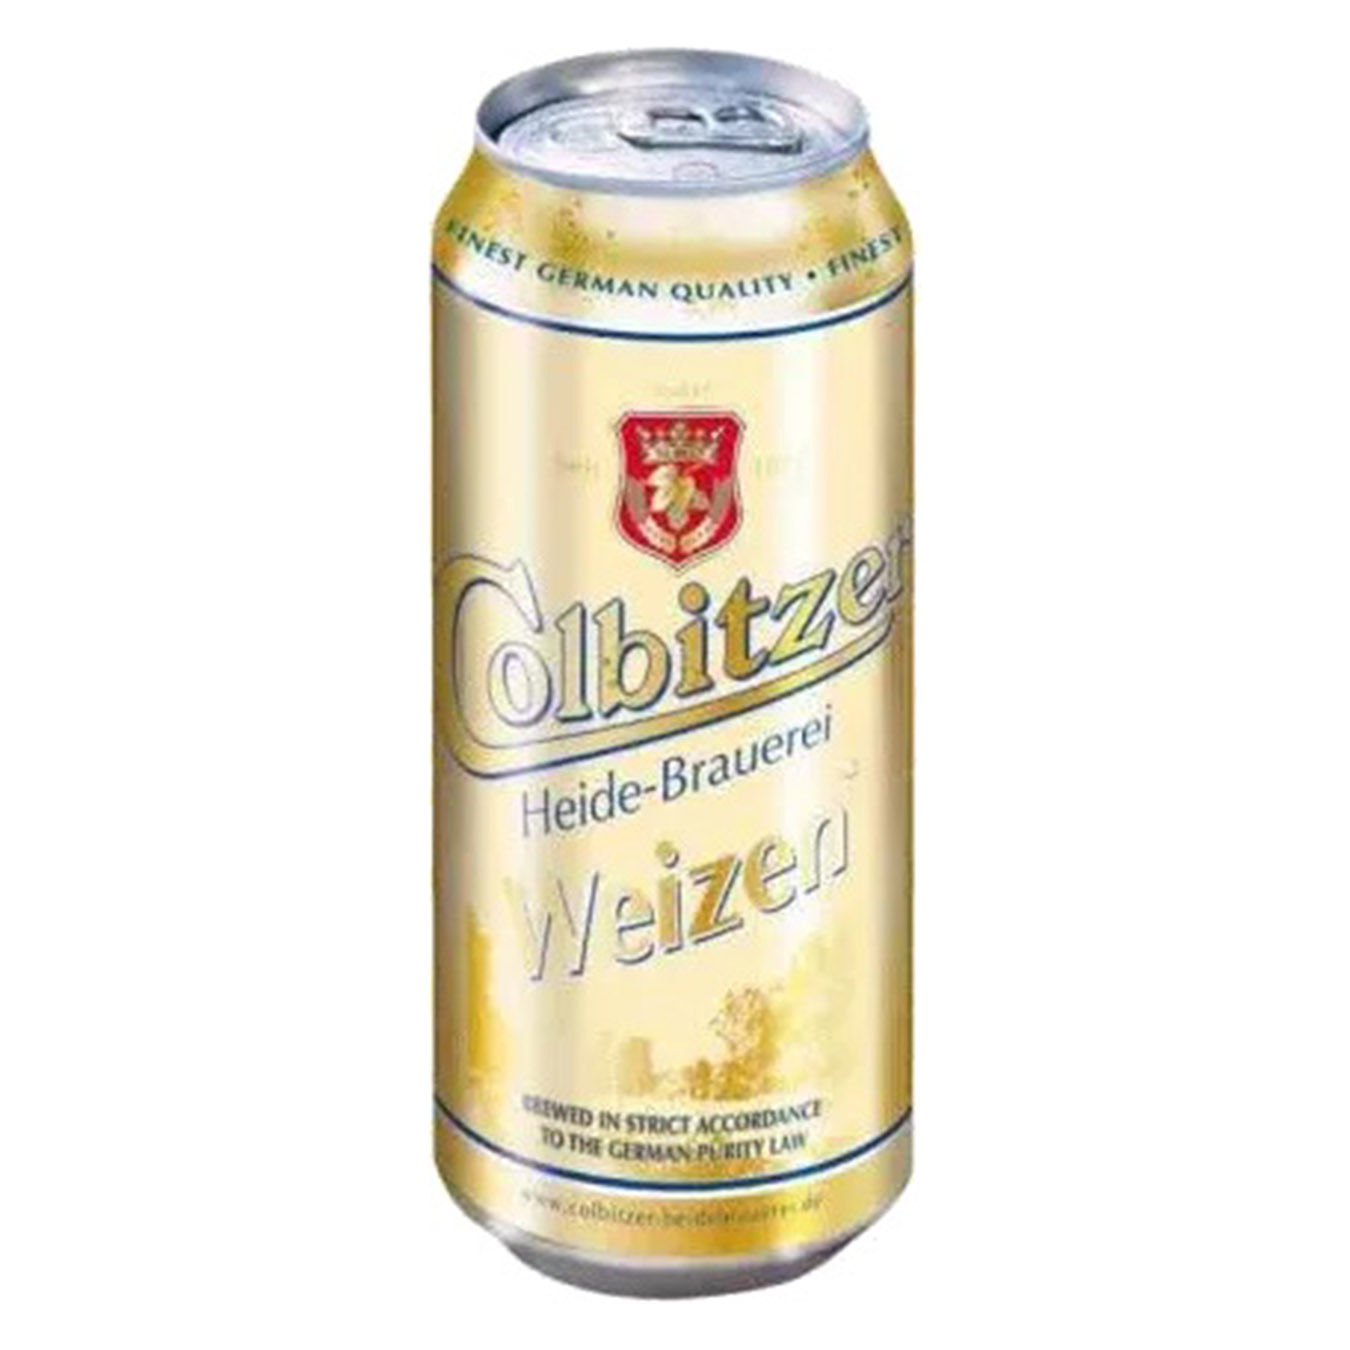 Beer Colbitzer light unfiltered wheat 5.3% 0.5 l iron can